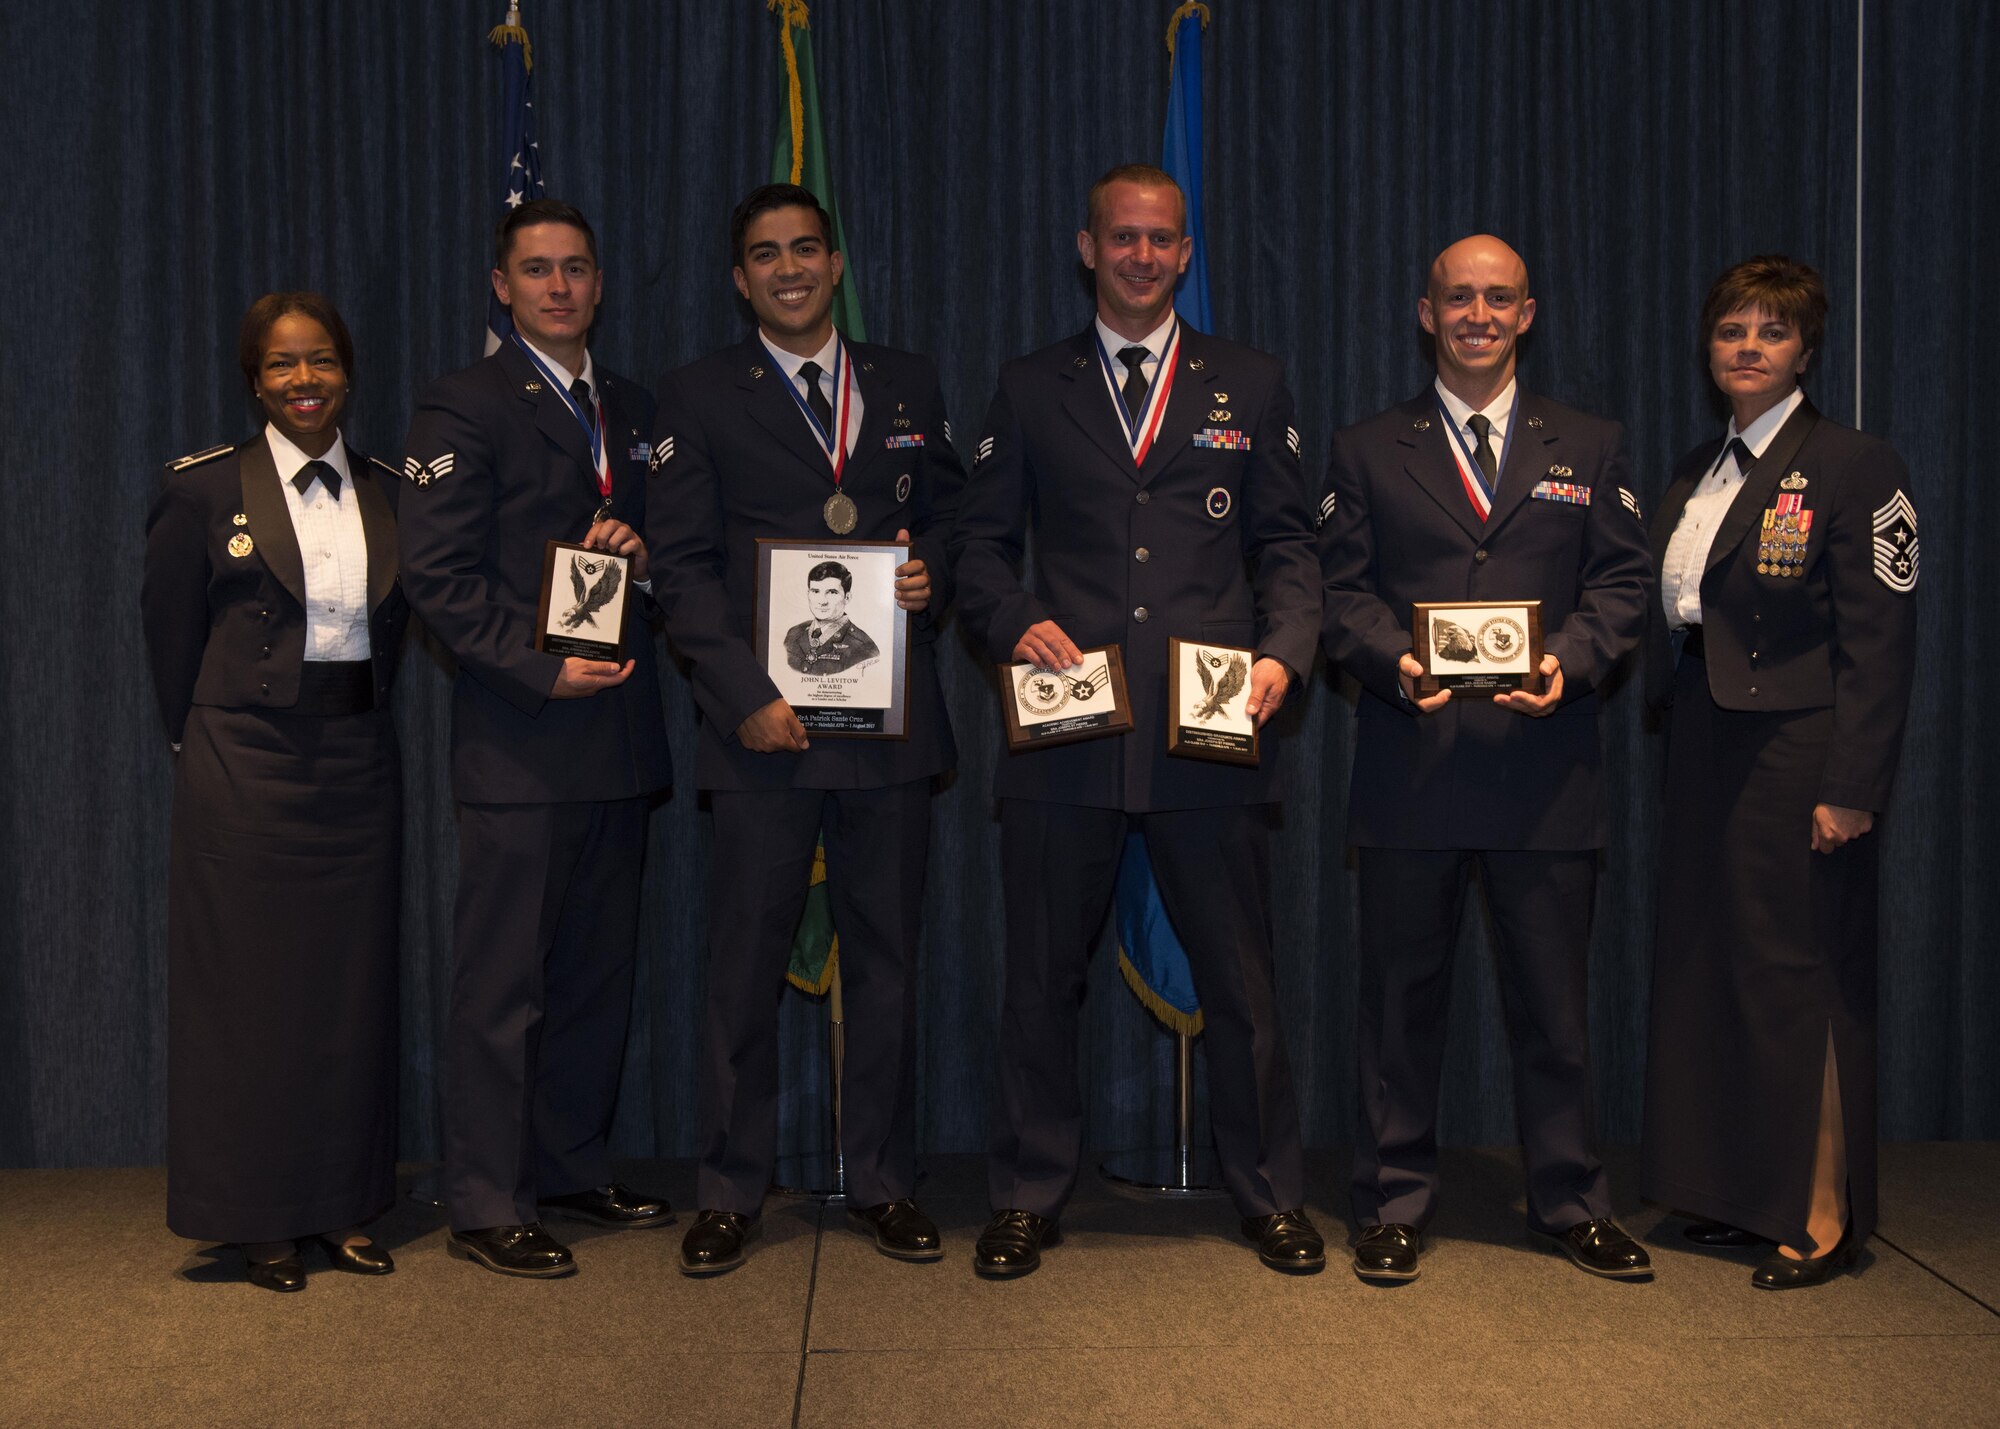 (From left to right) Col. Yvonne Spencer, 92nd Mission Support Group commander, Senior Airman Joshua Kalanick, 92nd Aerospace Medicine Squadron, Senior Airman Patrick Cruz, 22nd Training Squadron, Senior Airman Joseph St. Pierre, 66th Training Squadron, Senior Airman Jesus Ramos, 92nd Aircraft Maintenance Squadron, and Chief Master Sgt. Shannon Rix, 92nd Air Refueling Wing command chief, pose for a top graduate group photo Aug. 1, 2017, at Fairchild Air Force Base, Washington. Airman Leadership School is an educational program designed to develop enlisted Airmen into front-line supervisors.